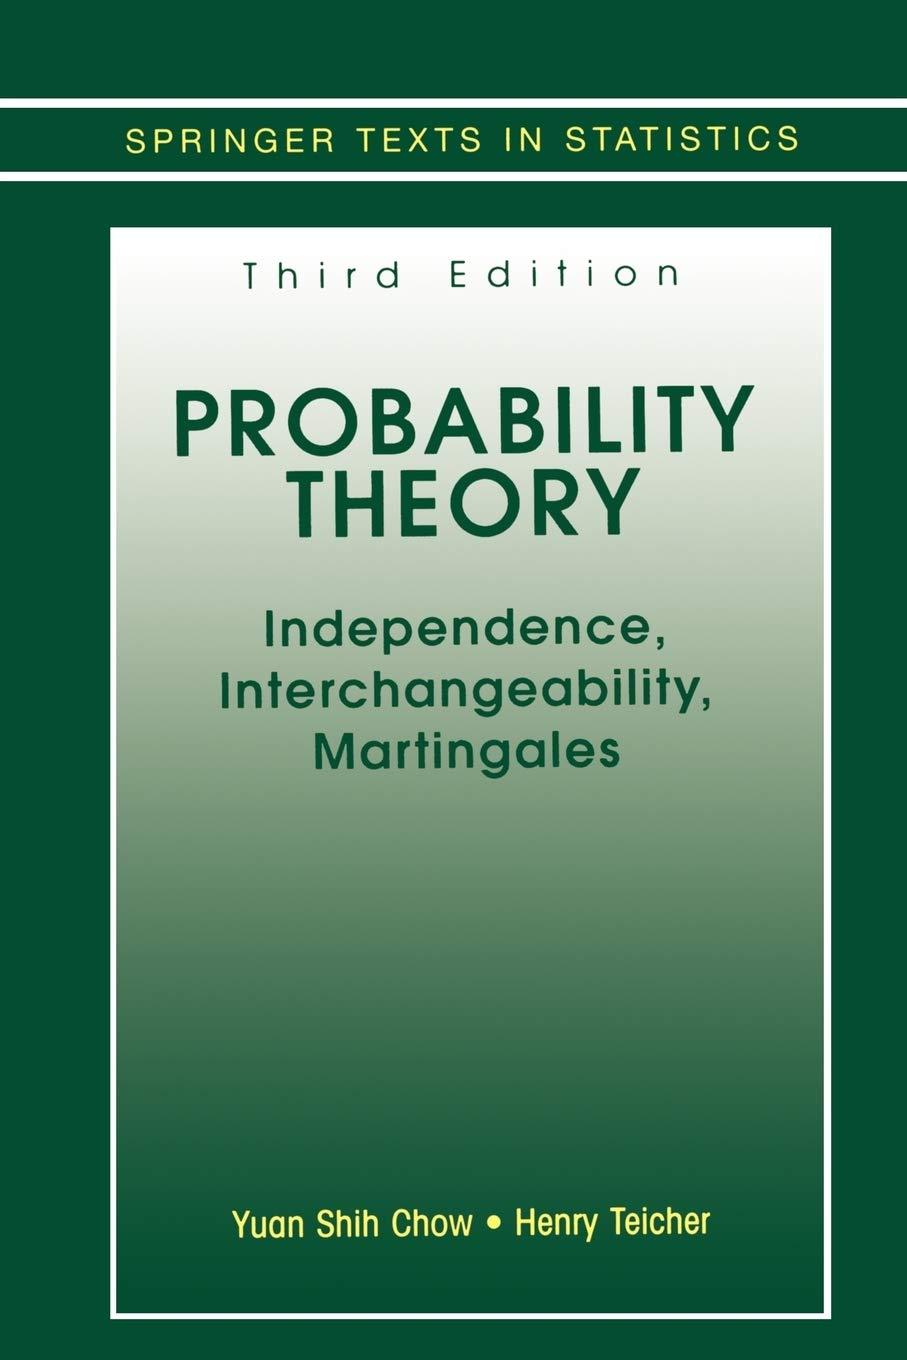 probability theory independence interchangeability martingales 3rd edition yuan shih chow, henry teicher